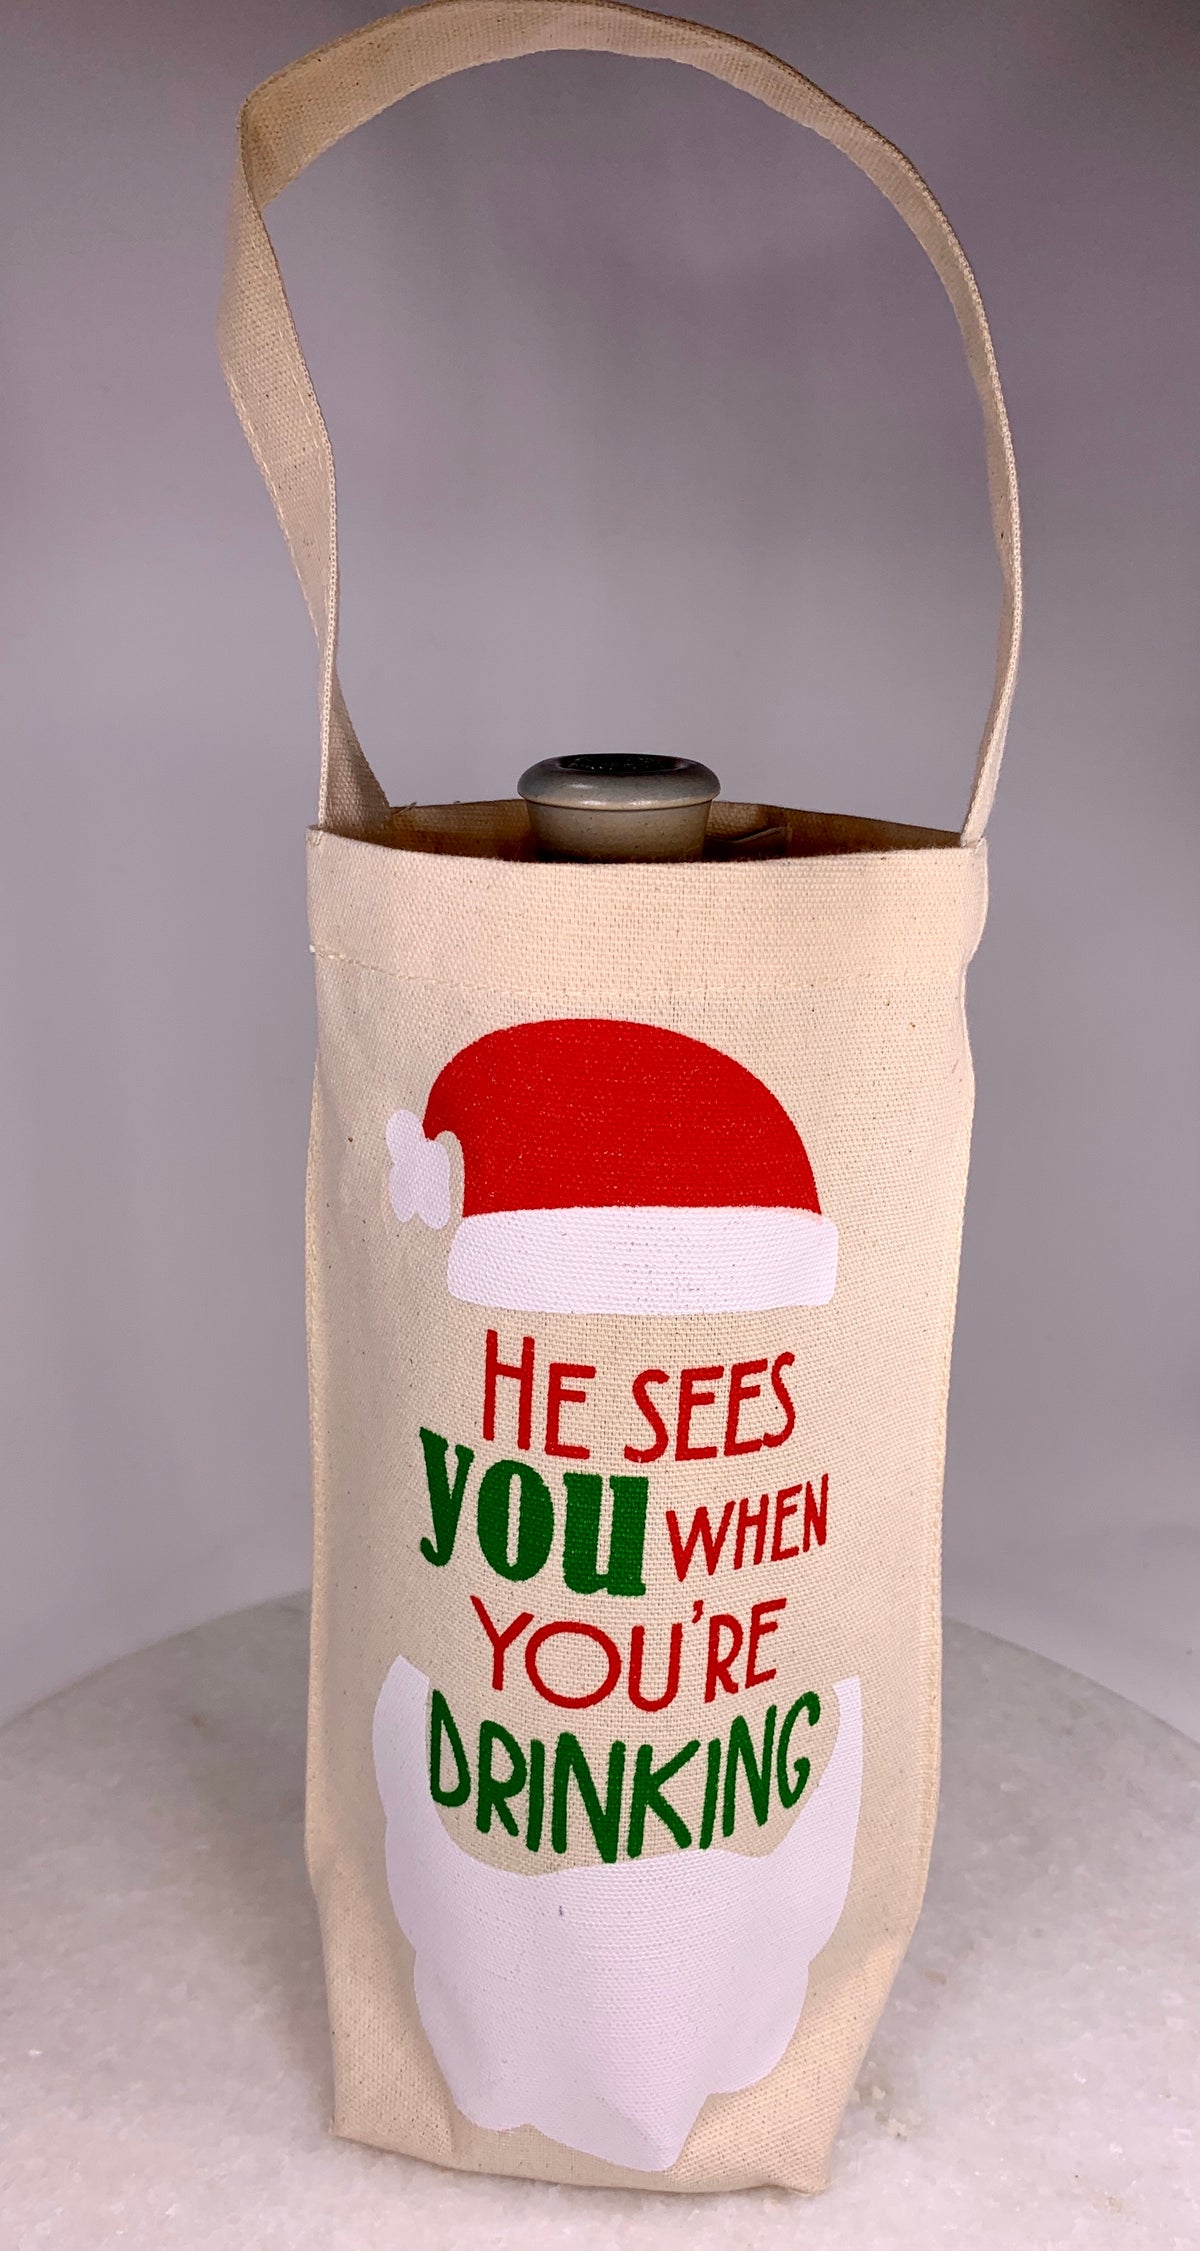 “He sees you when you’re drinking” Bottle Bag.